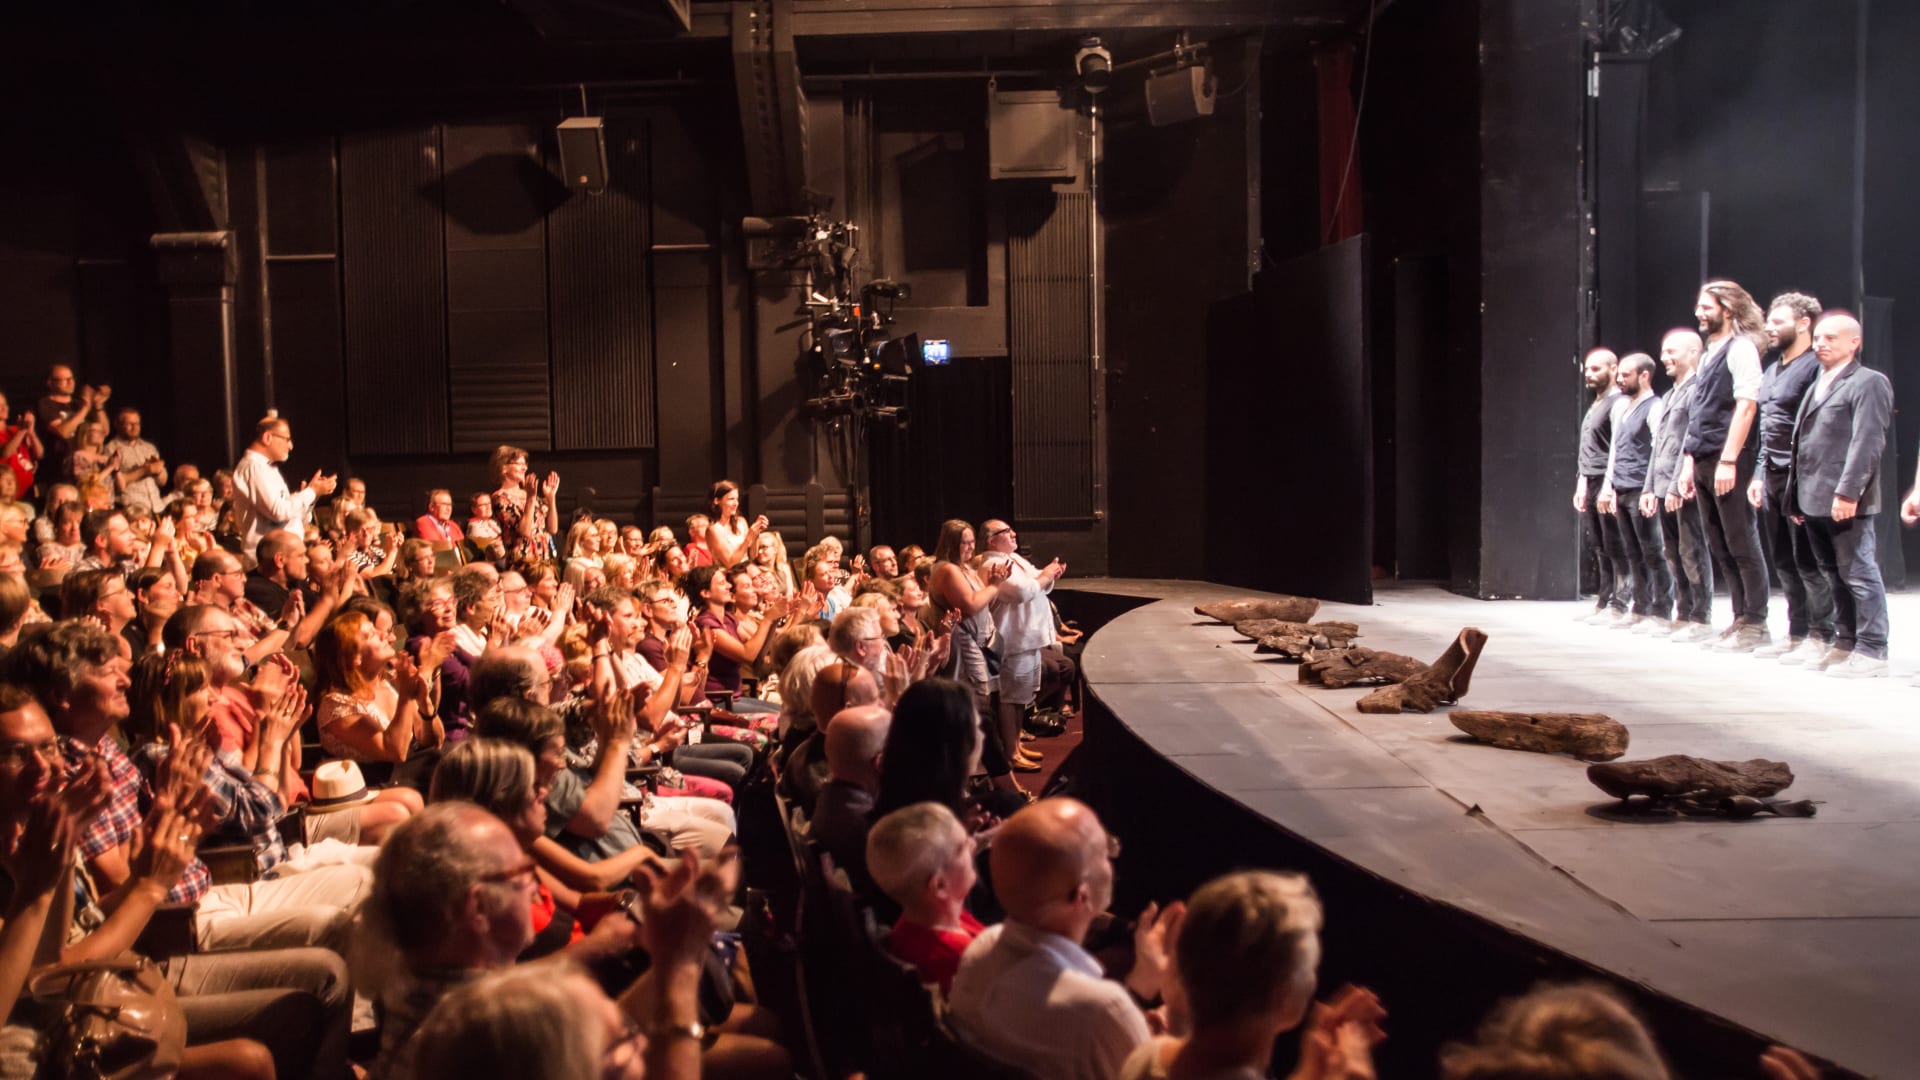 The audience gives applause to the performers of the Macbettu at Tampere Theatre Festival in 2018